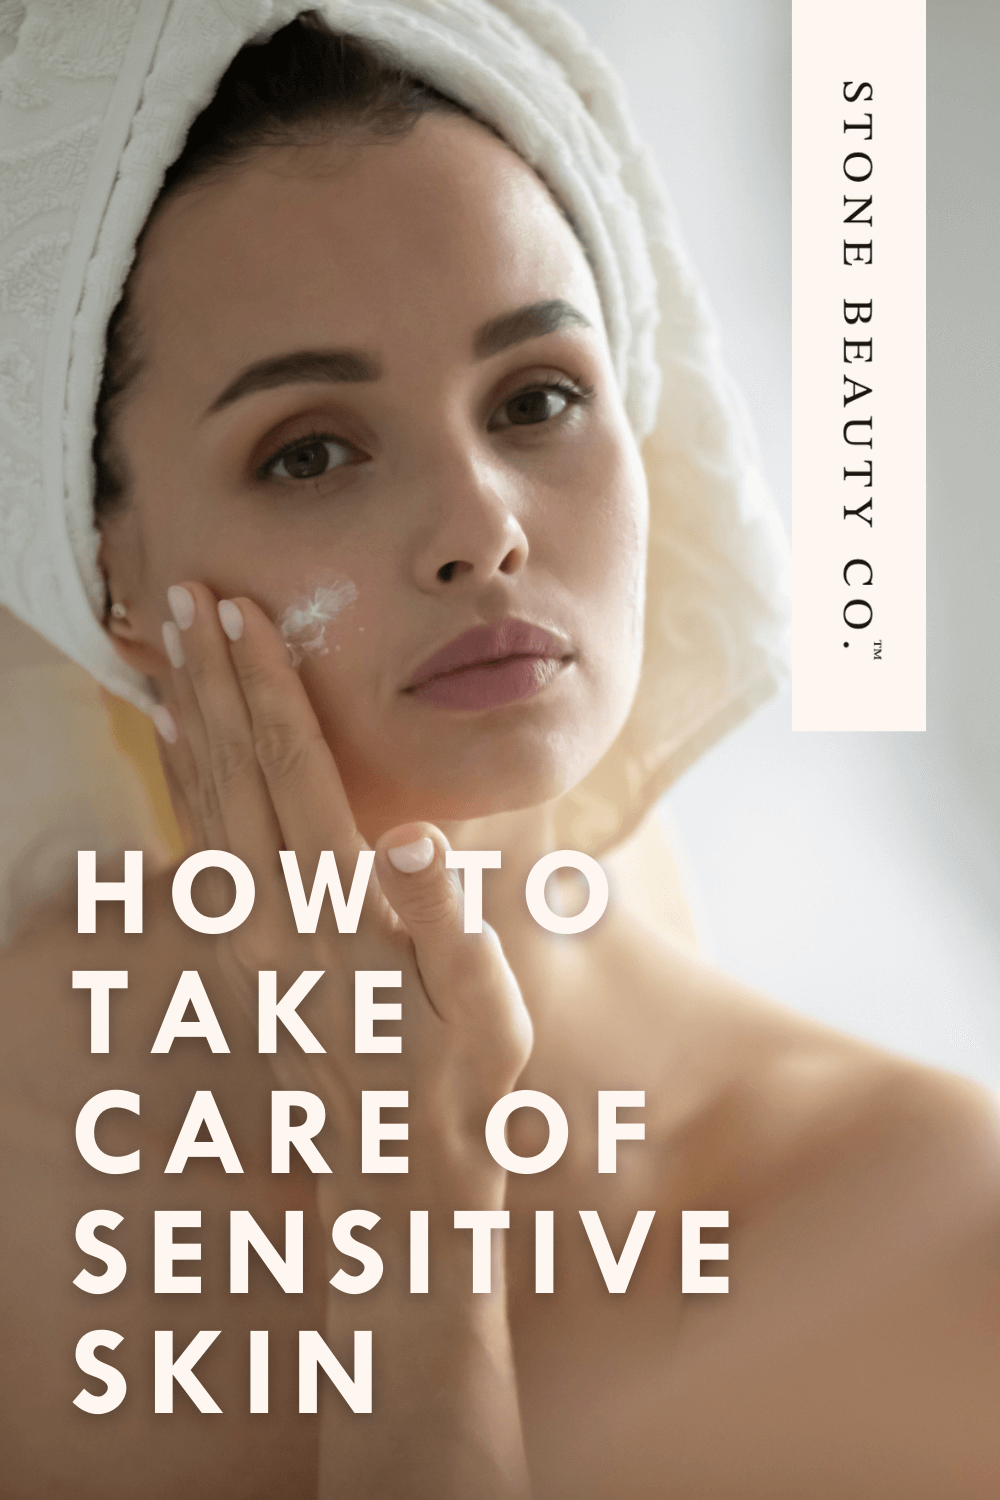 Treatments and Tips for Caring for Sensitive Skin